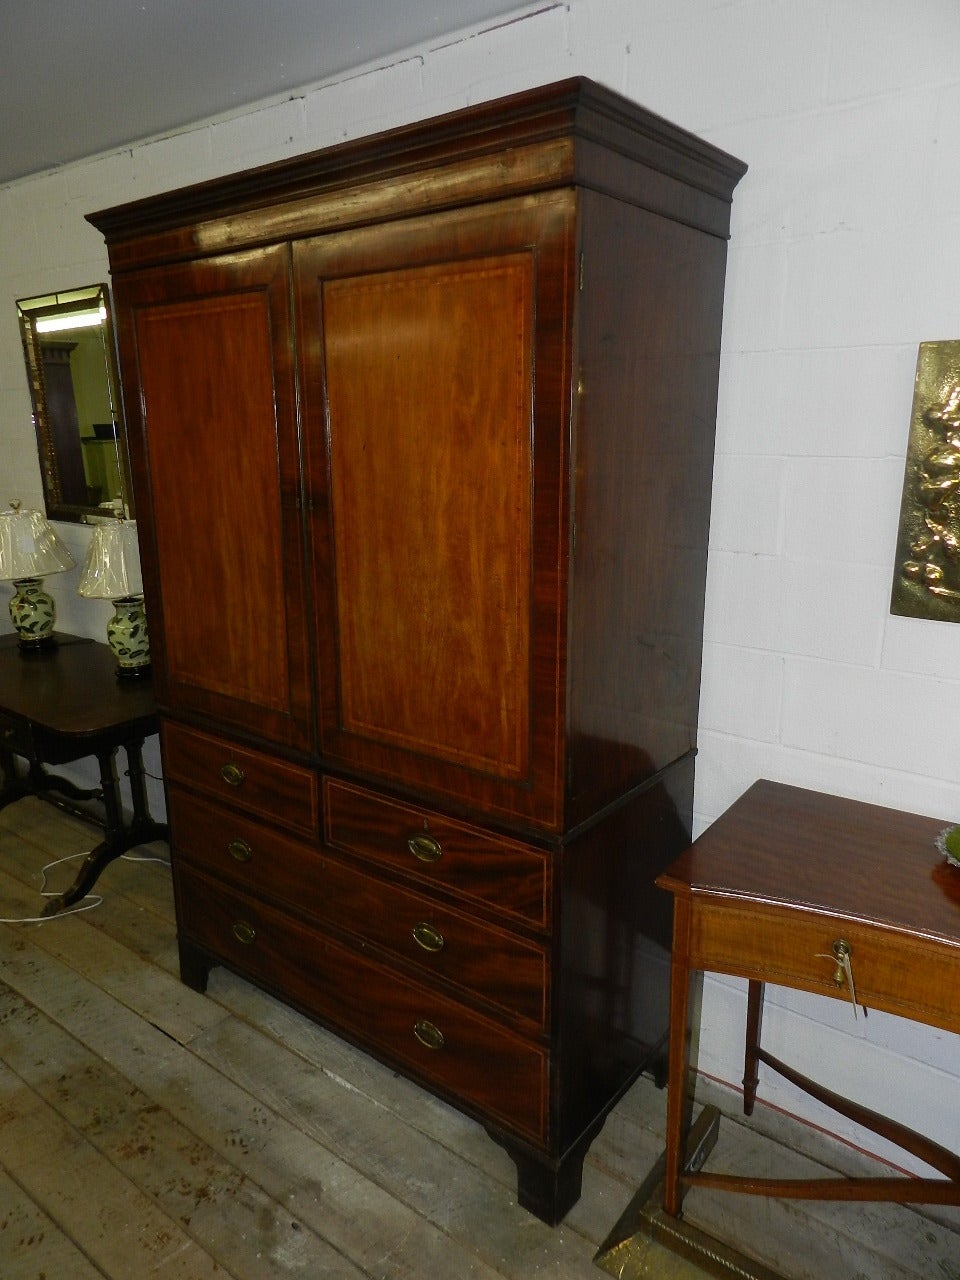 Mahogany linen press. The two crossbanded and inlaid panel doors have a brass door bead. The base has dovetailed inlaid drawers with antique brass handles and bracket feet.